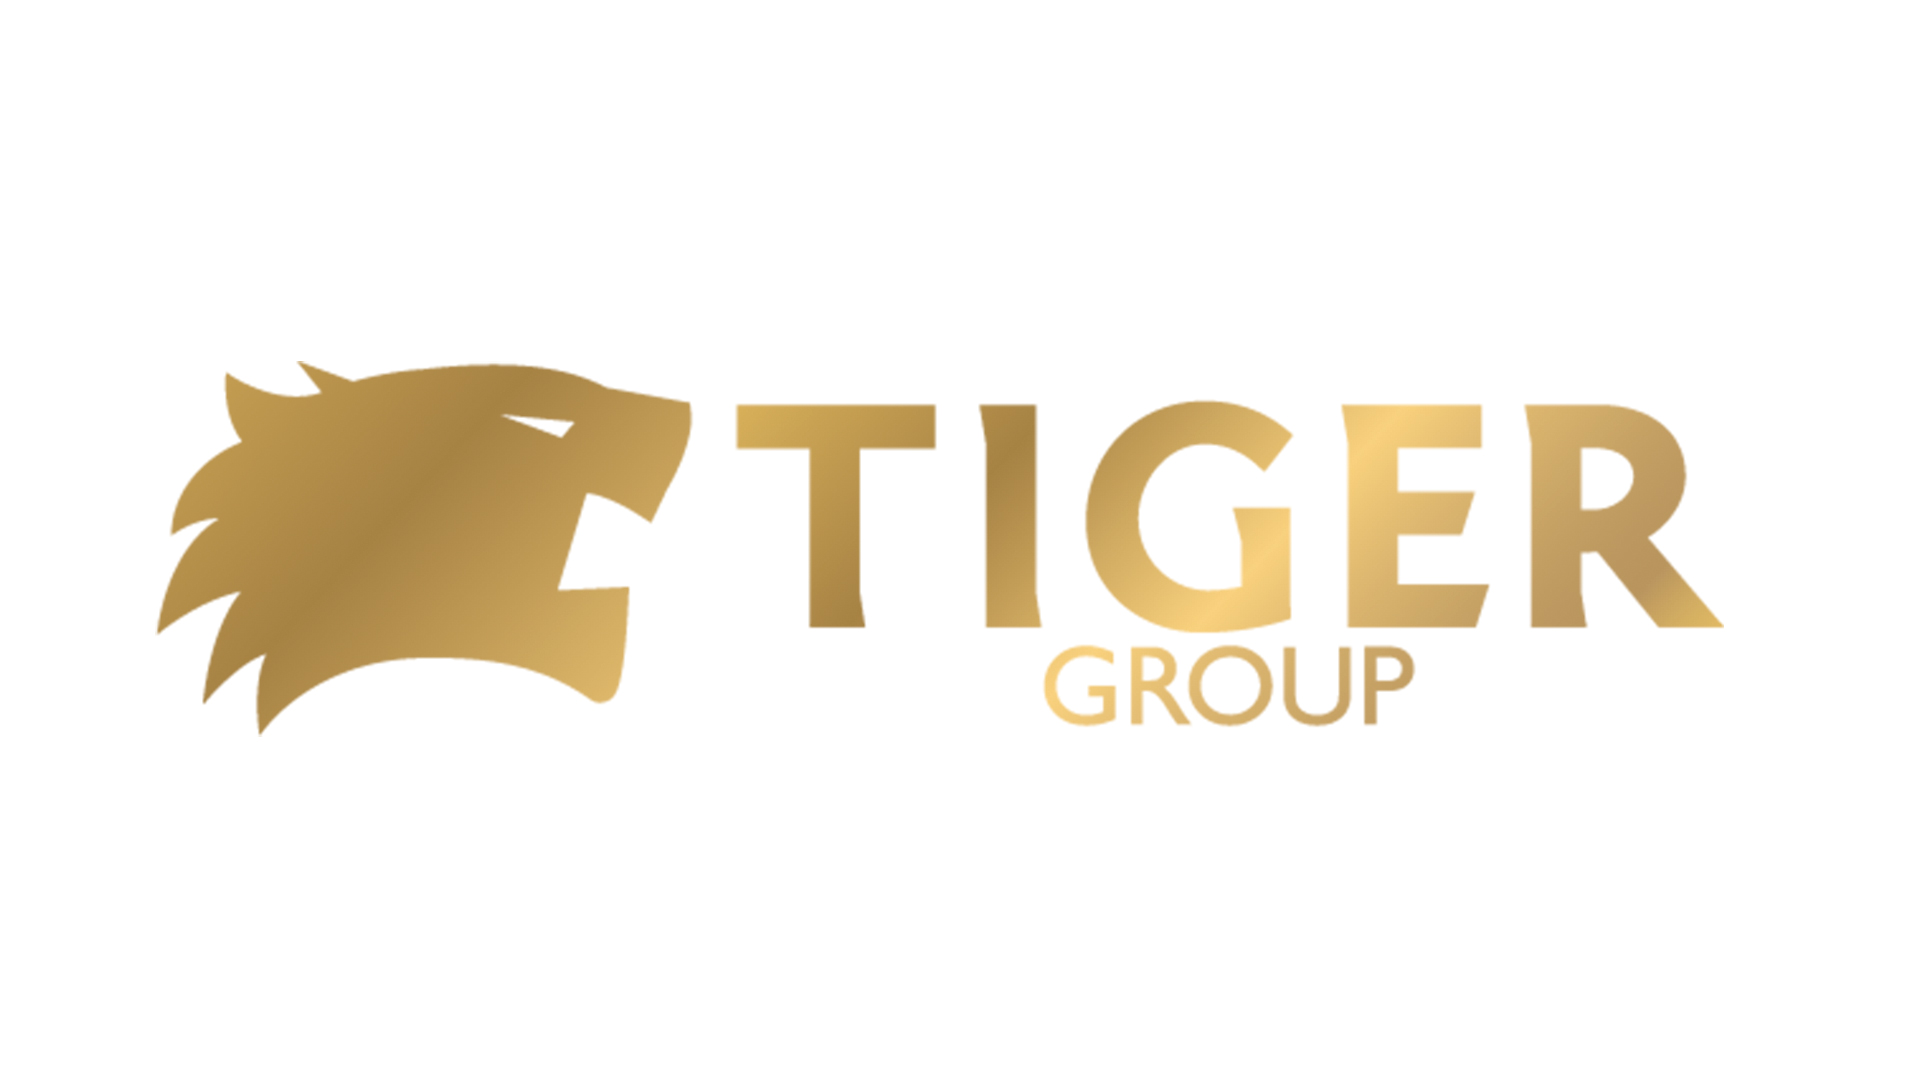 ALTAI TOWER APARTMENTS by Tiger Group in Jumeirah Village Triangle, Dubai - 8